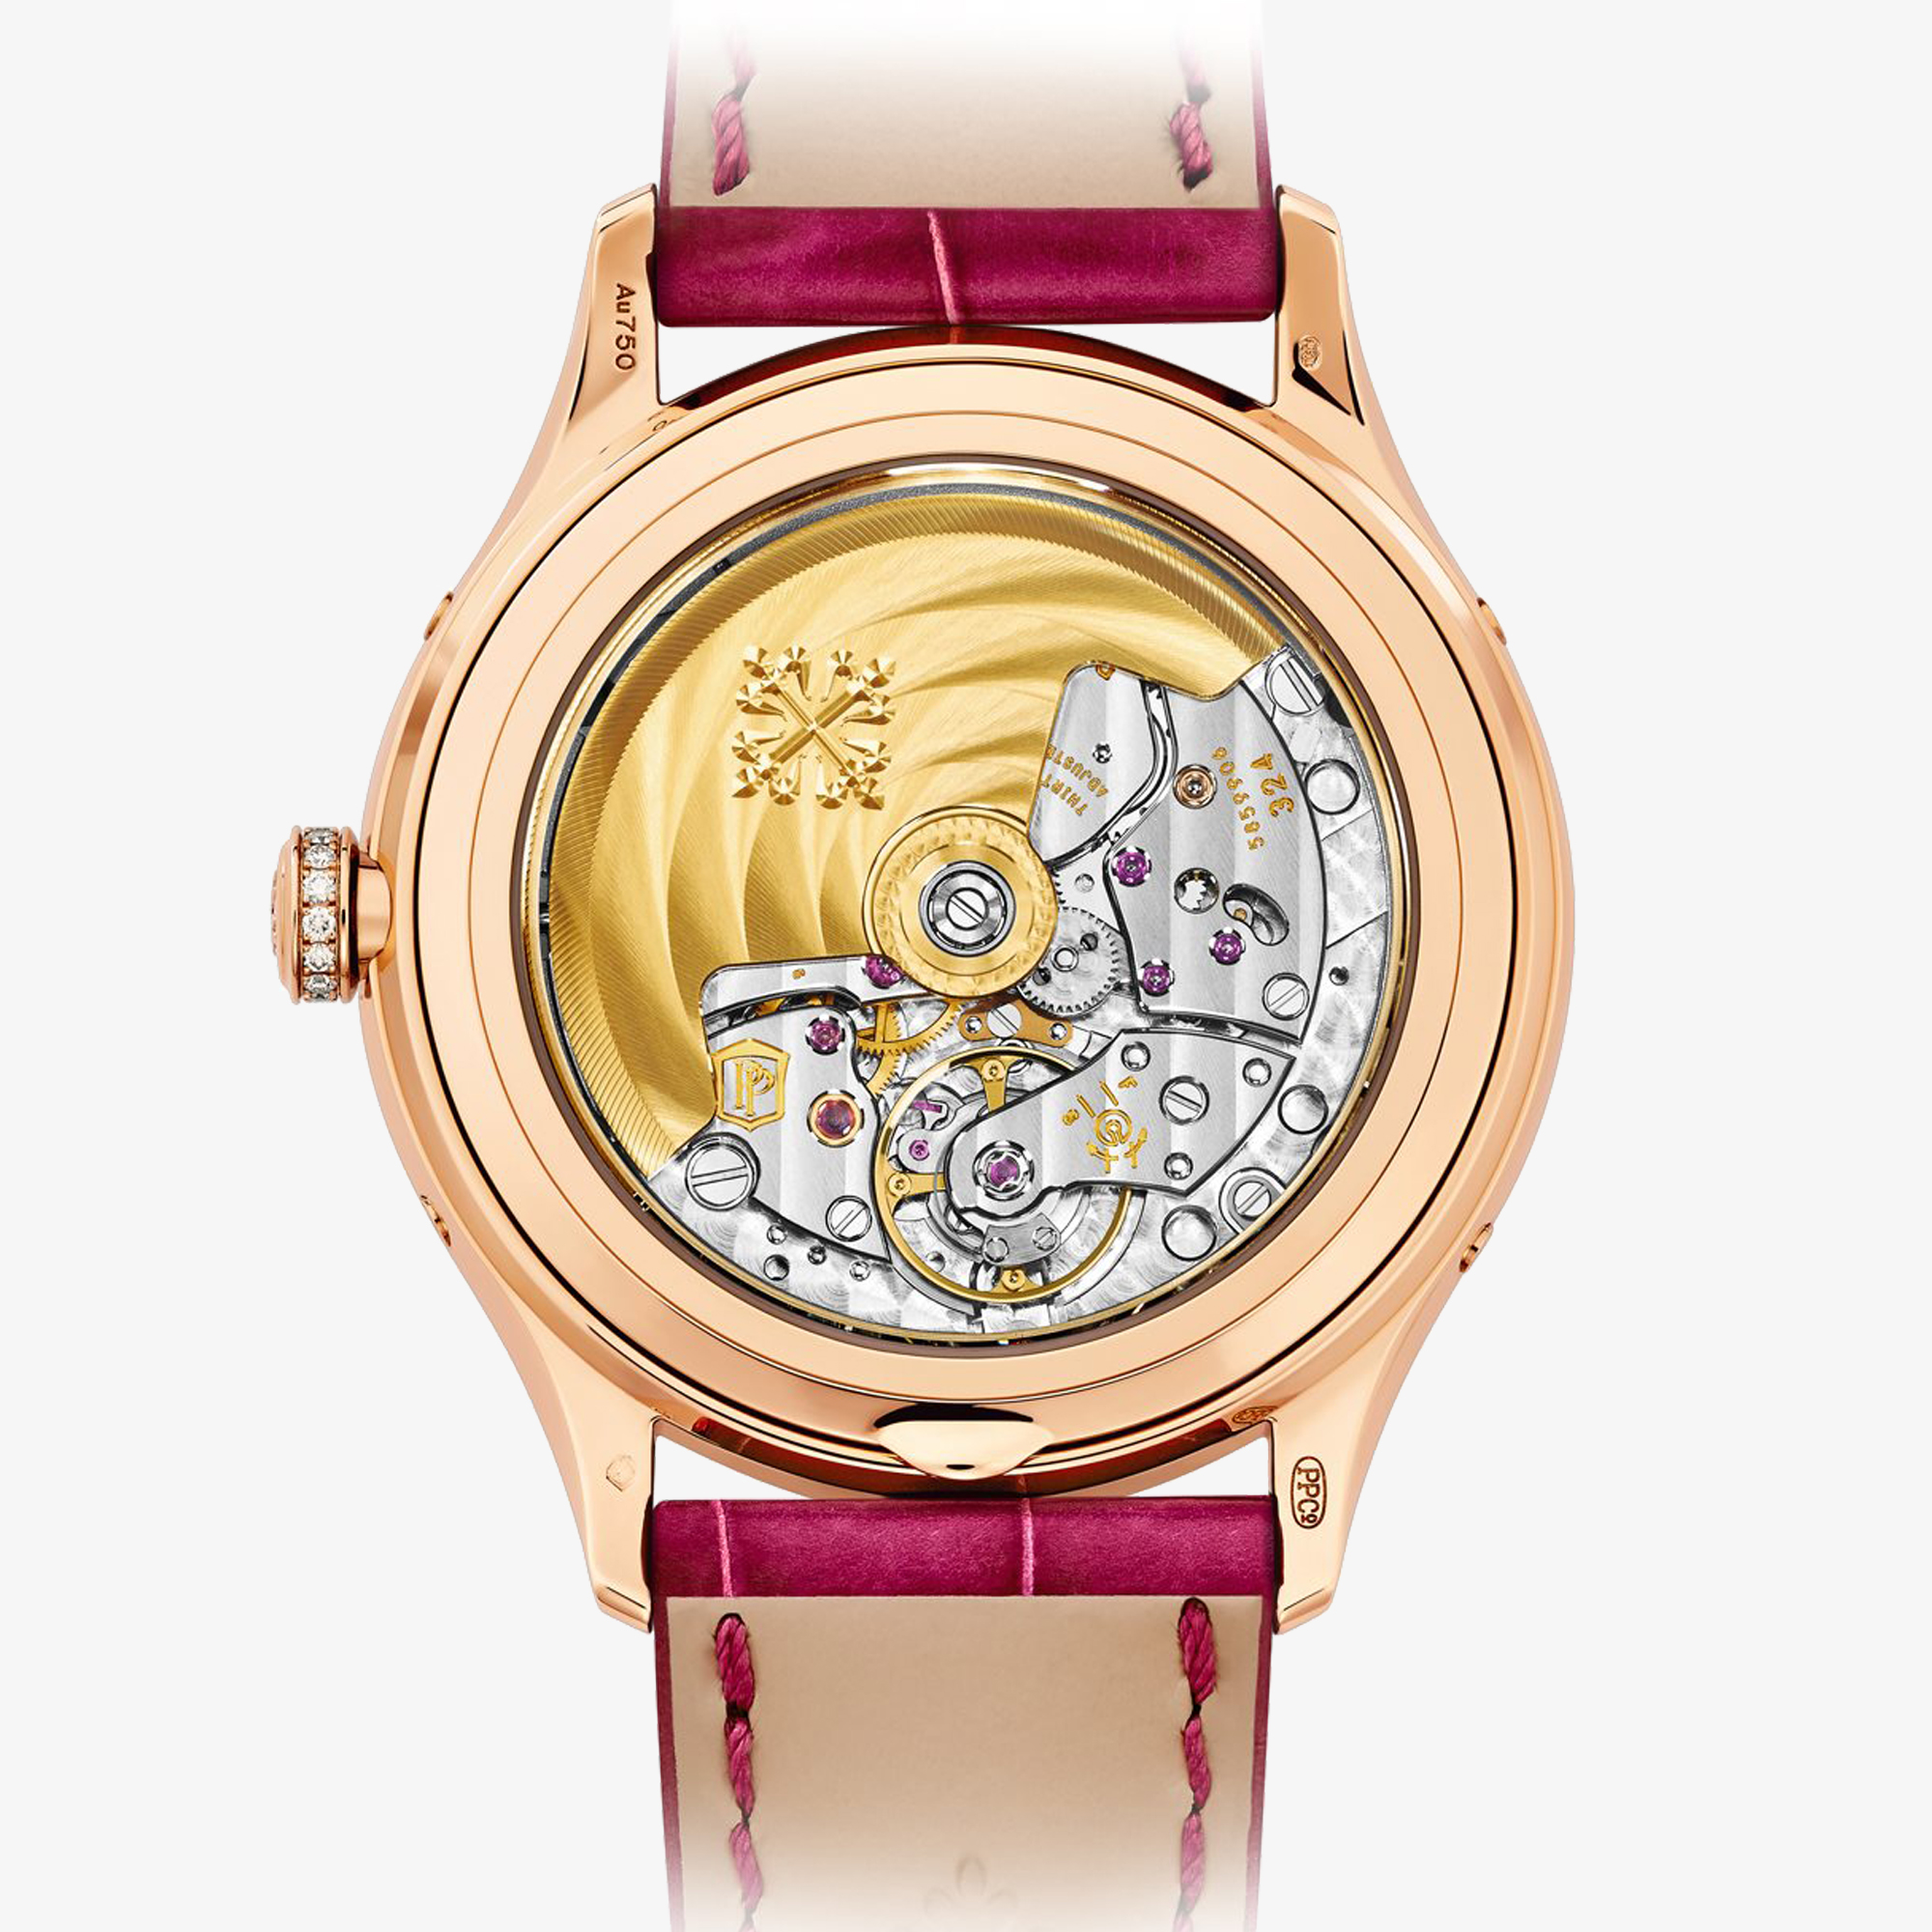 PATEK PHILIPPE COMPLICATIONS ANNUAL CALENDΑR WITH DIAMONDS